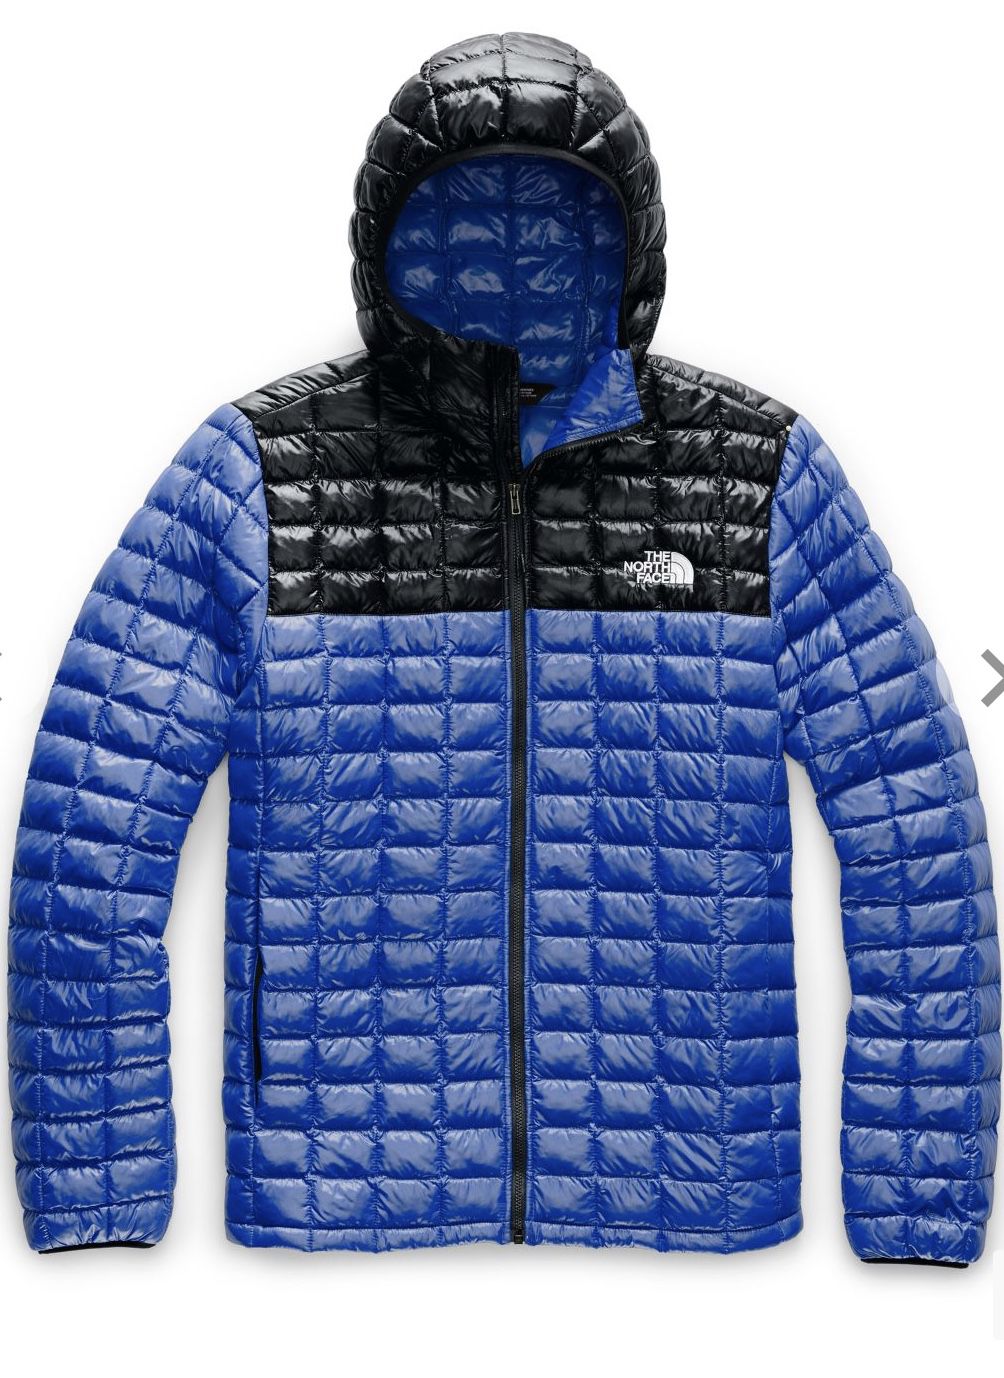 The north face jacket Thermoball S